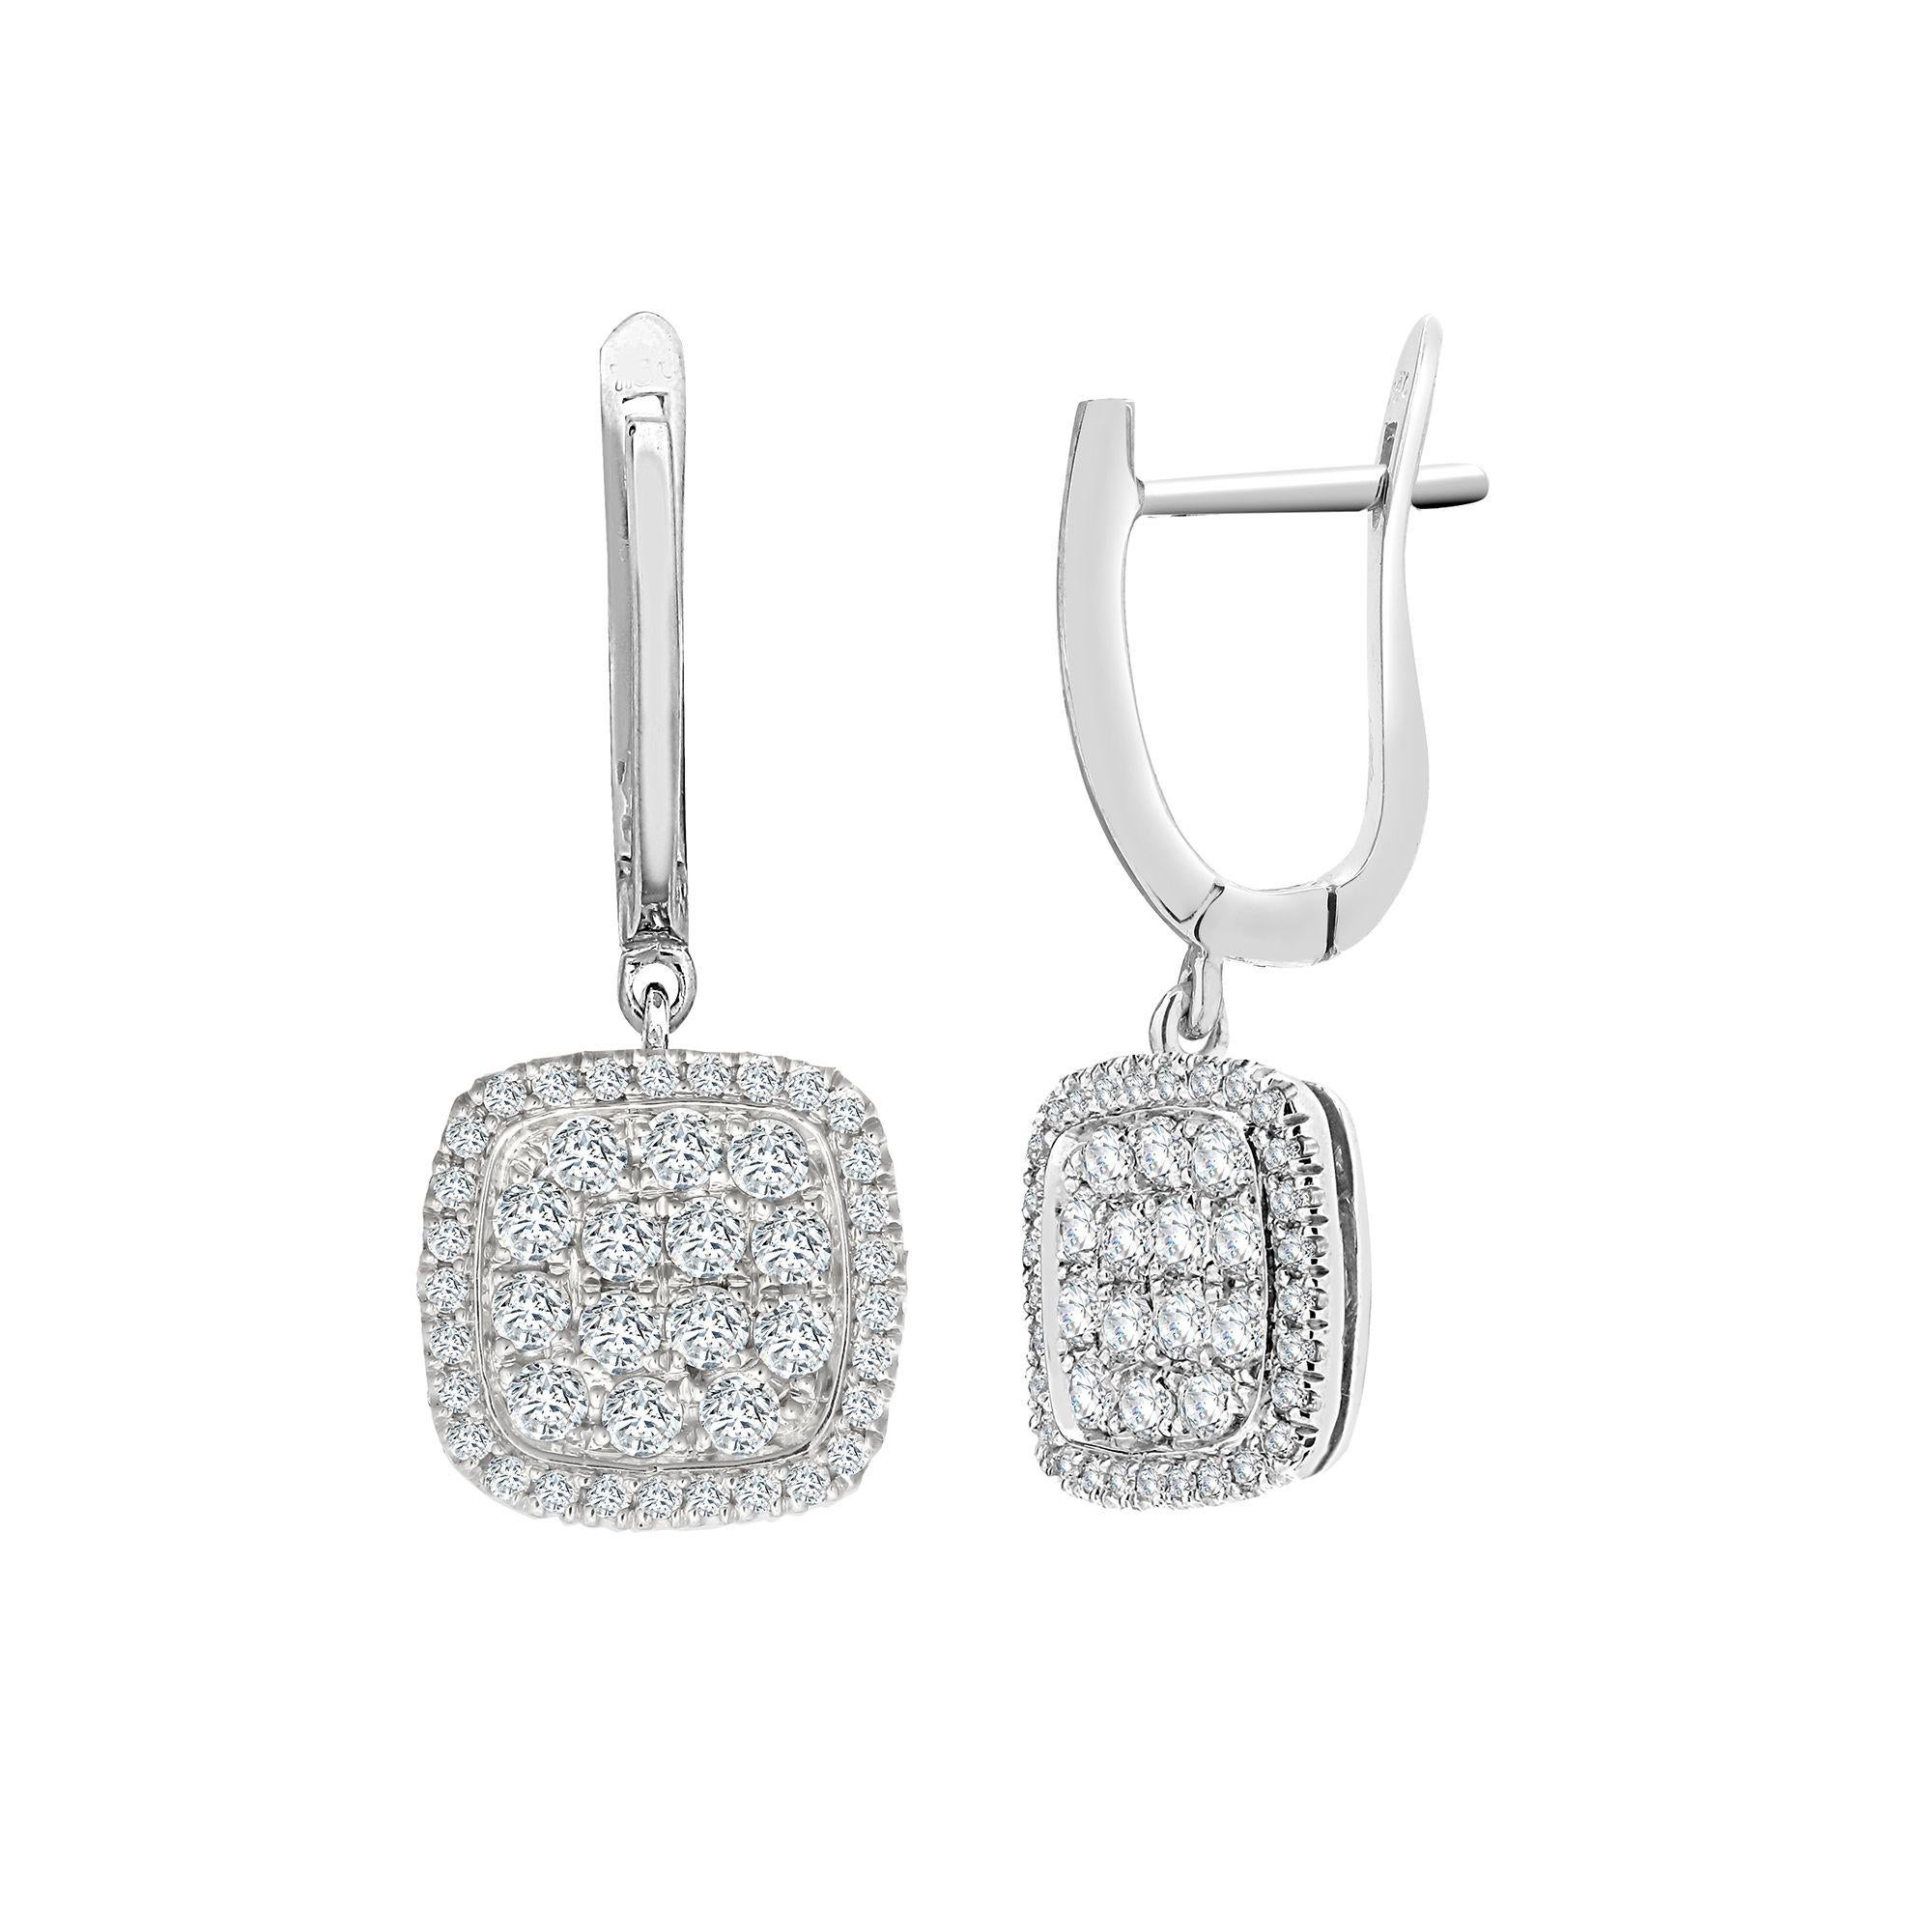 1.10ct Diamond Earrings Square Cushion Drop Hoops 18ct White Gold In New Condition For Sale In Ilford, GB